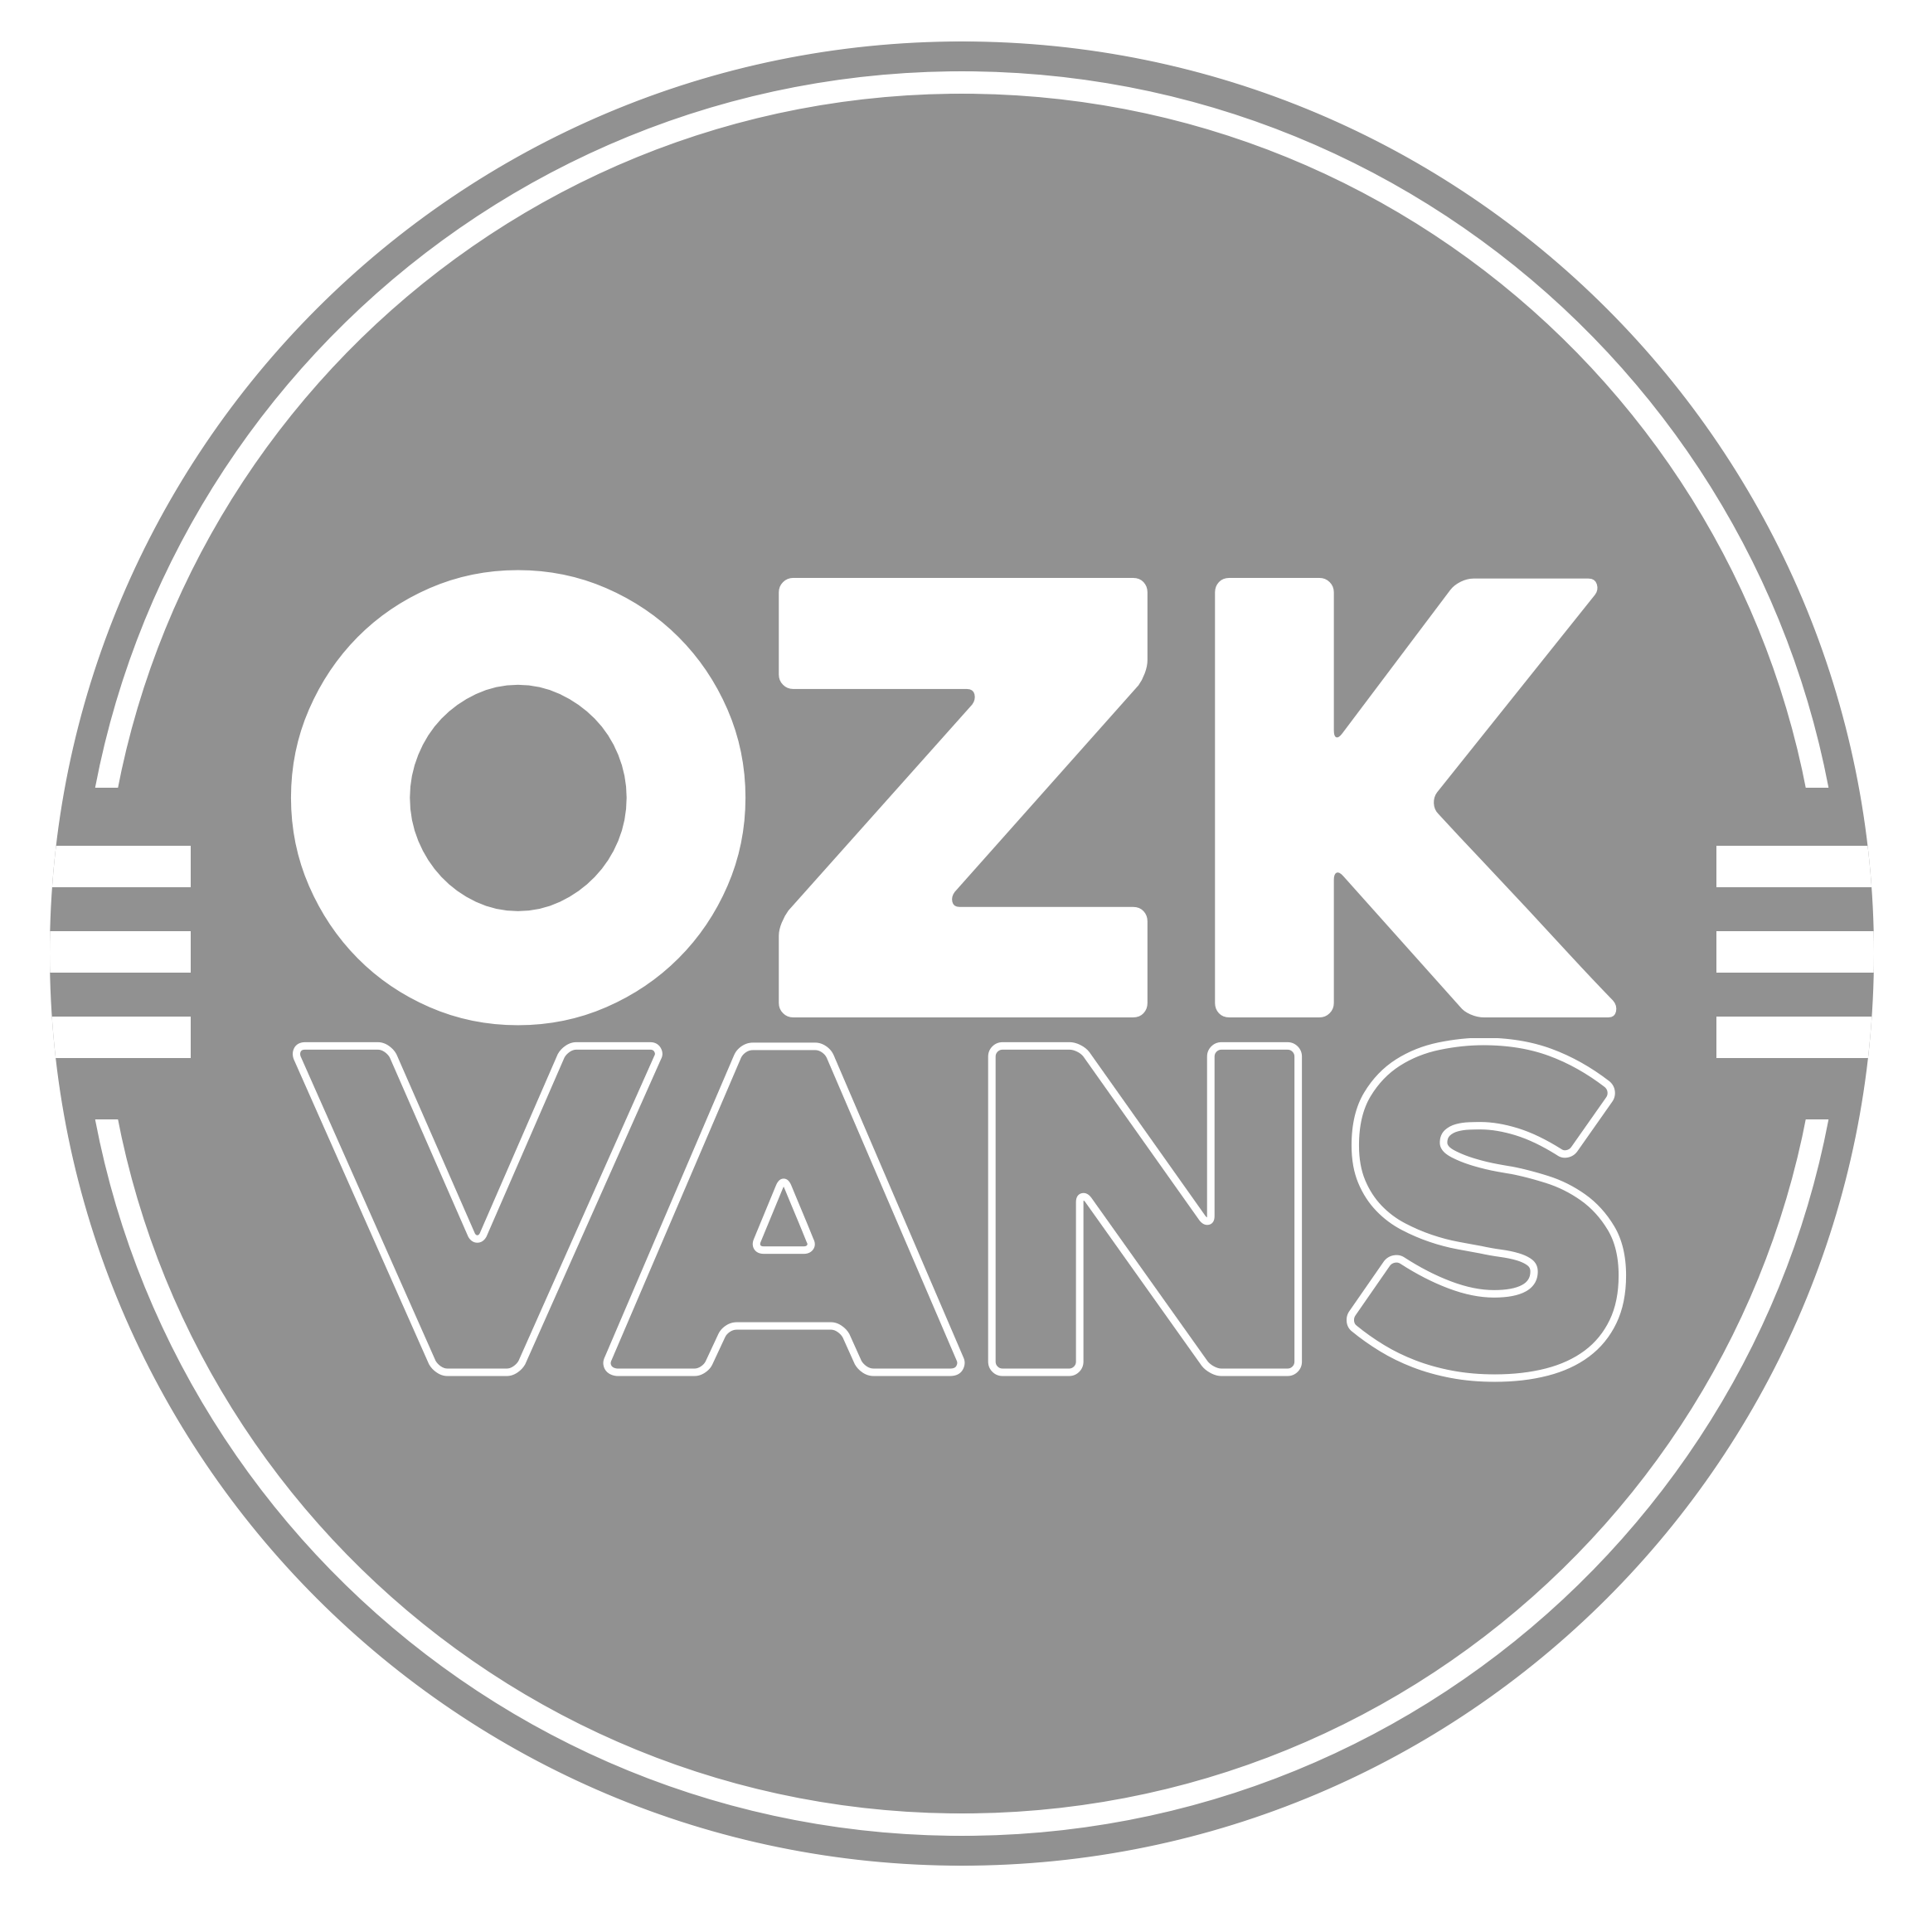 New OZK Vans Round Logo thinner lines.png